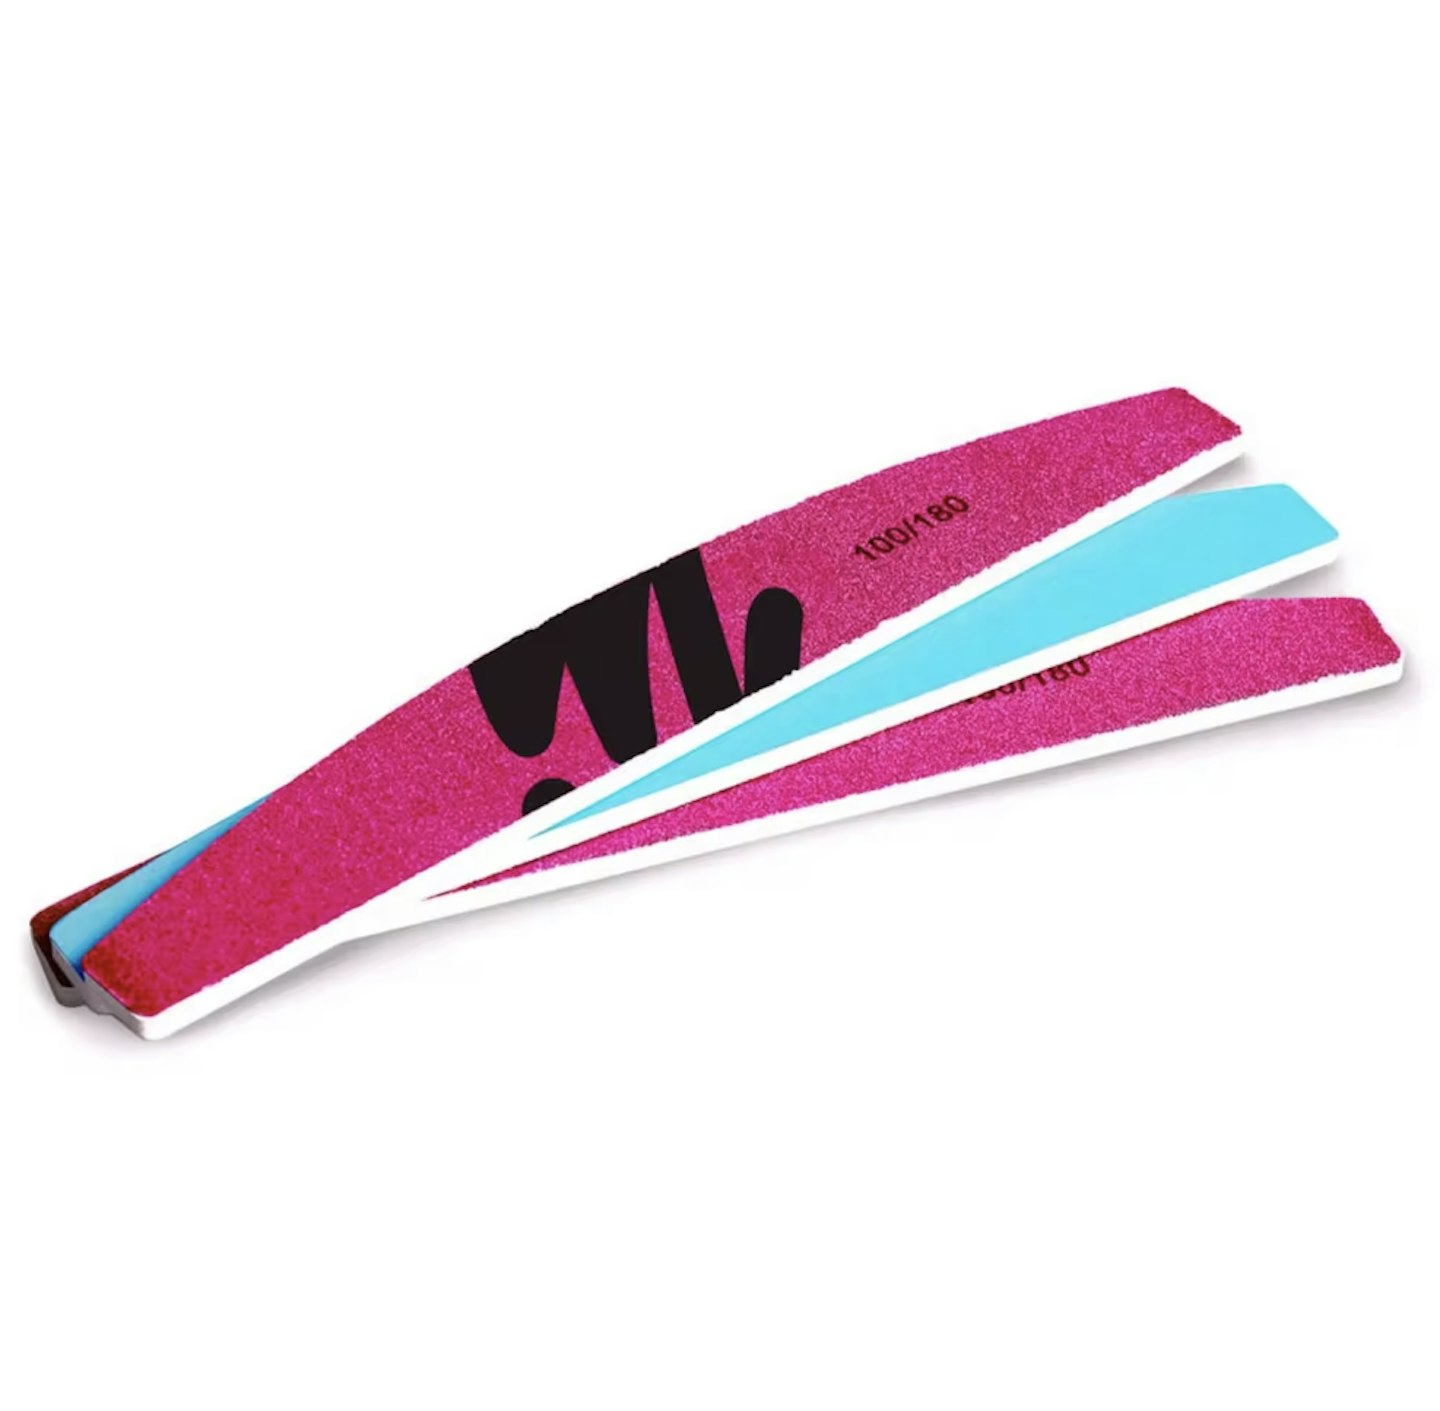 Mylee 3 Half-Moon Double Sided Nail File 100/180 Grit